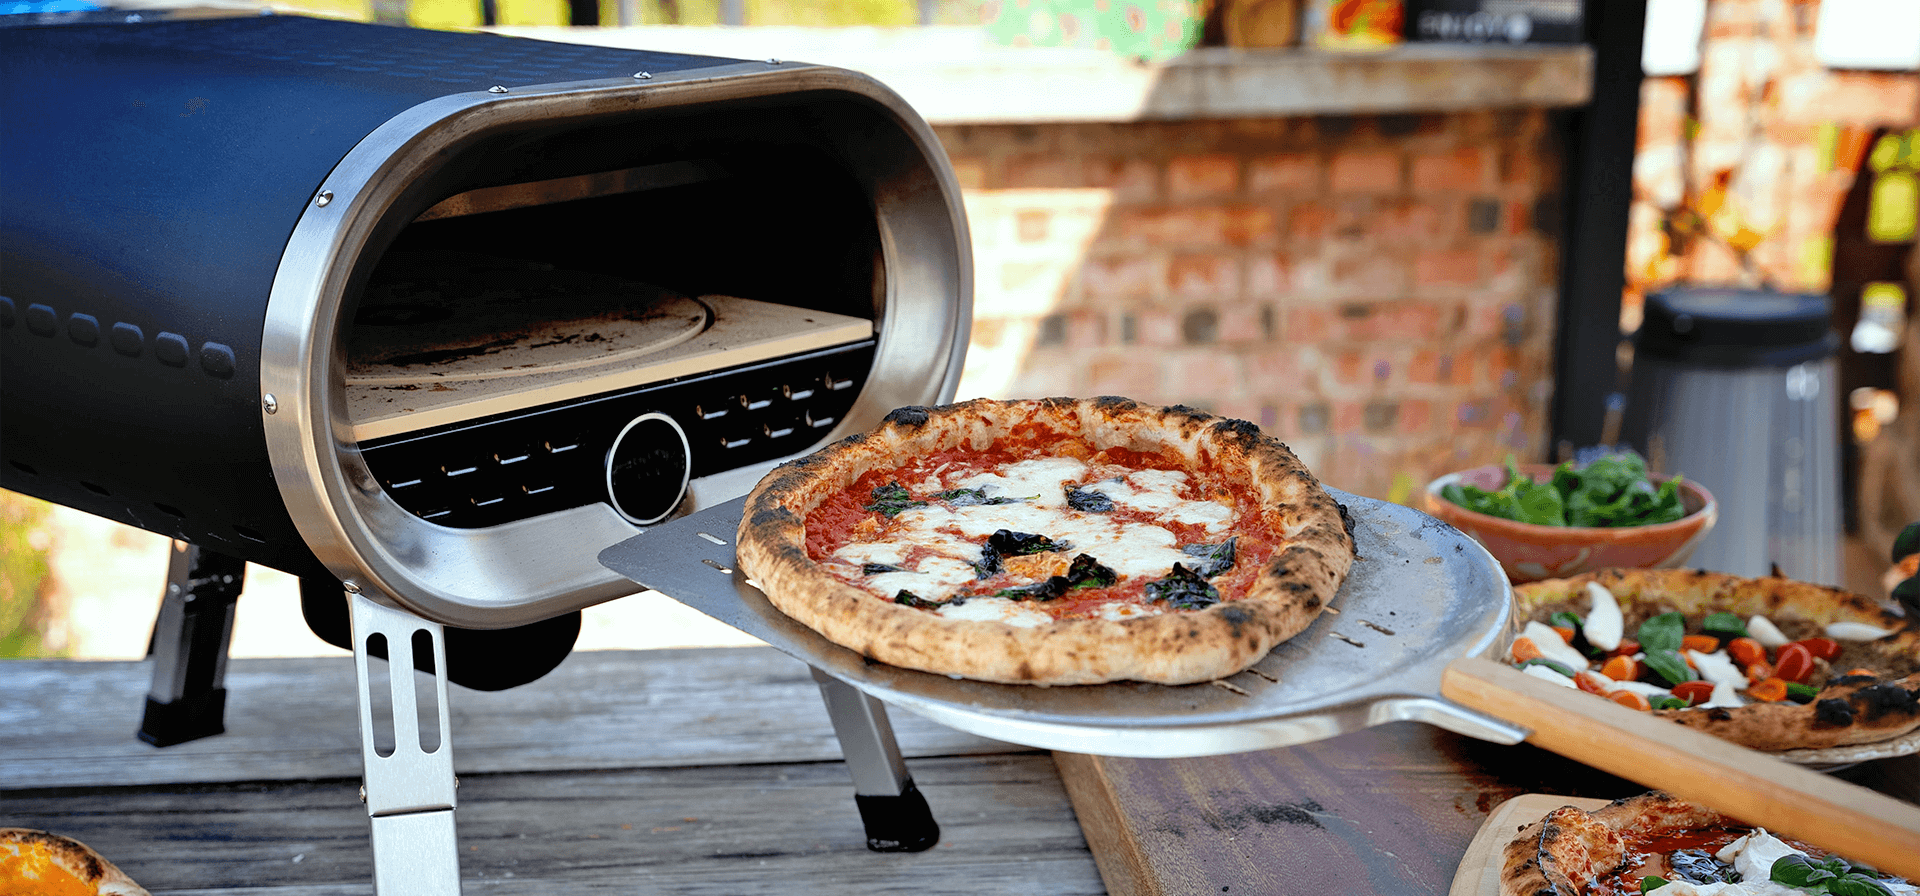 apply the gas timer to gas pizza oven